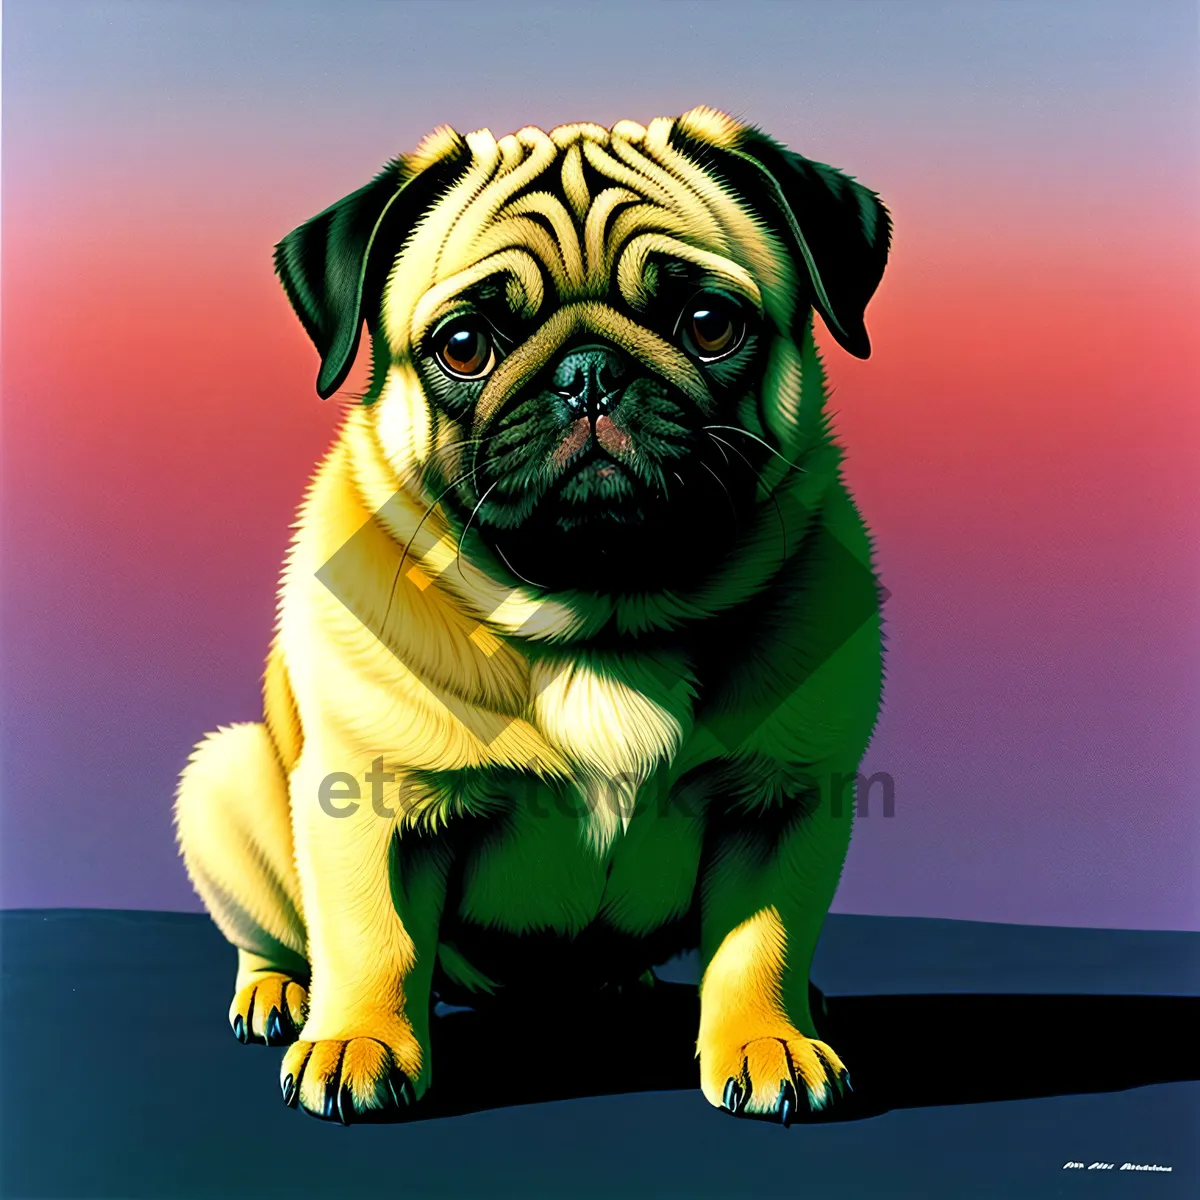 Picture of Cute Wrinkled Pug Bulldog Puppy - Adorable Studio Portrait